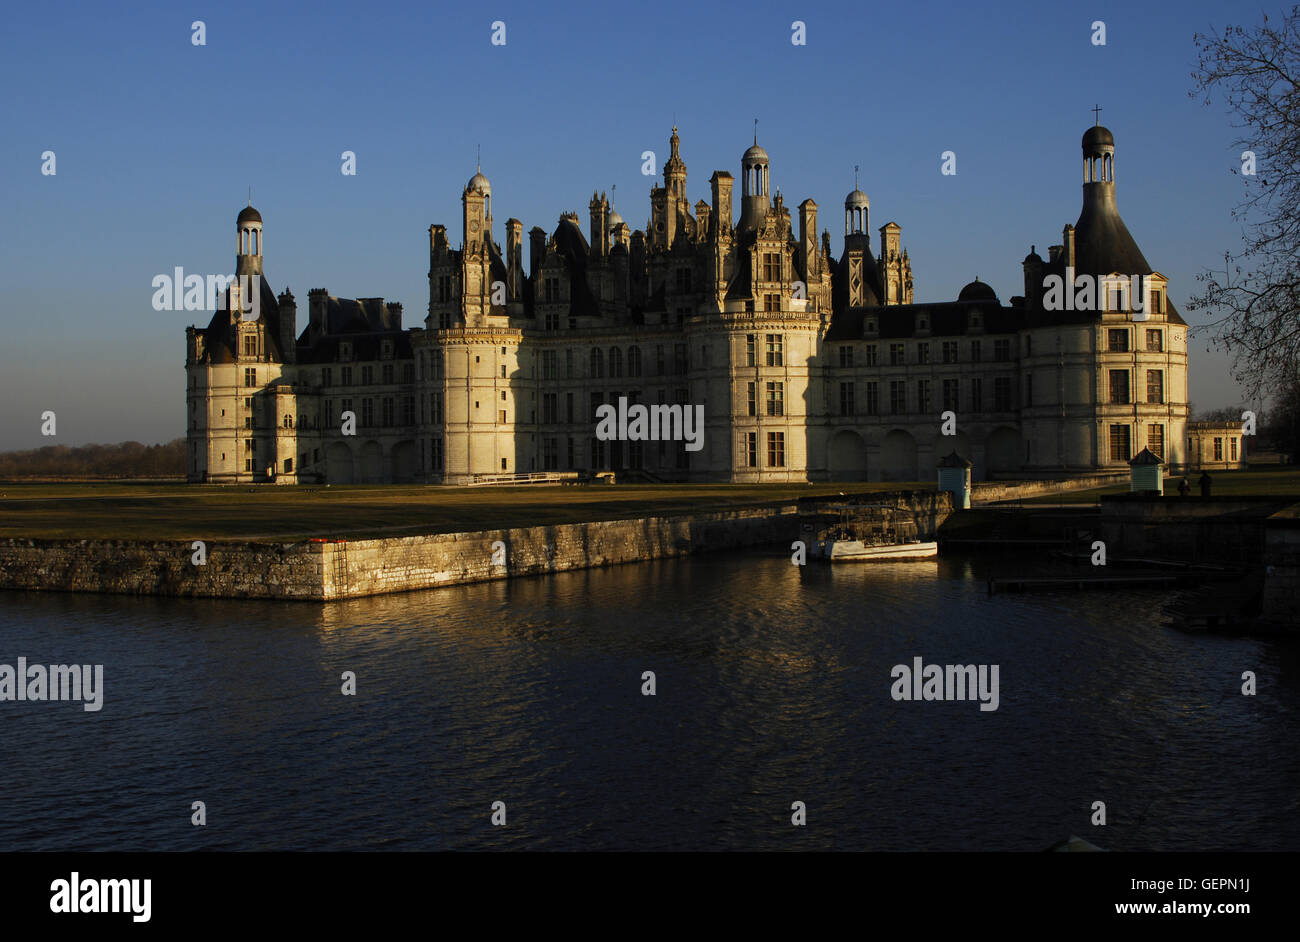 Renaissance Art. France. 16th century. Castle of Chambord. Attributed to Domenico da Cortona  (ca 1465- ca 1549). Built by order of King Francis I between 1519-1539, along the river Closson. Exterior. Northwest façade. Loire Valley. Stock Photo